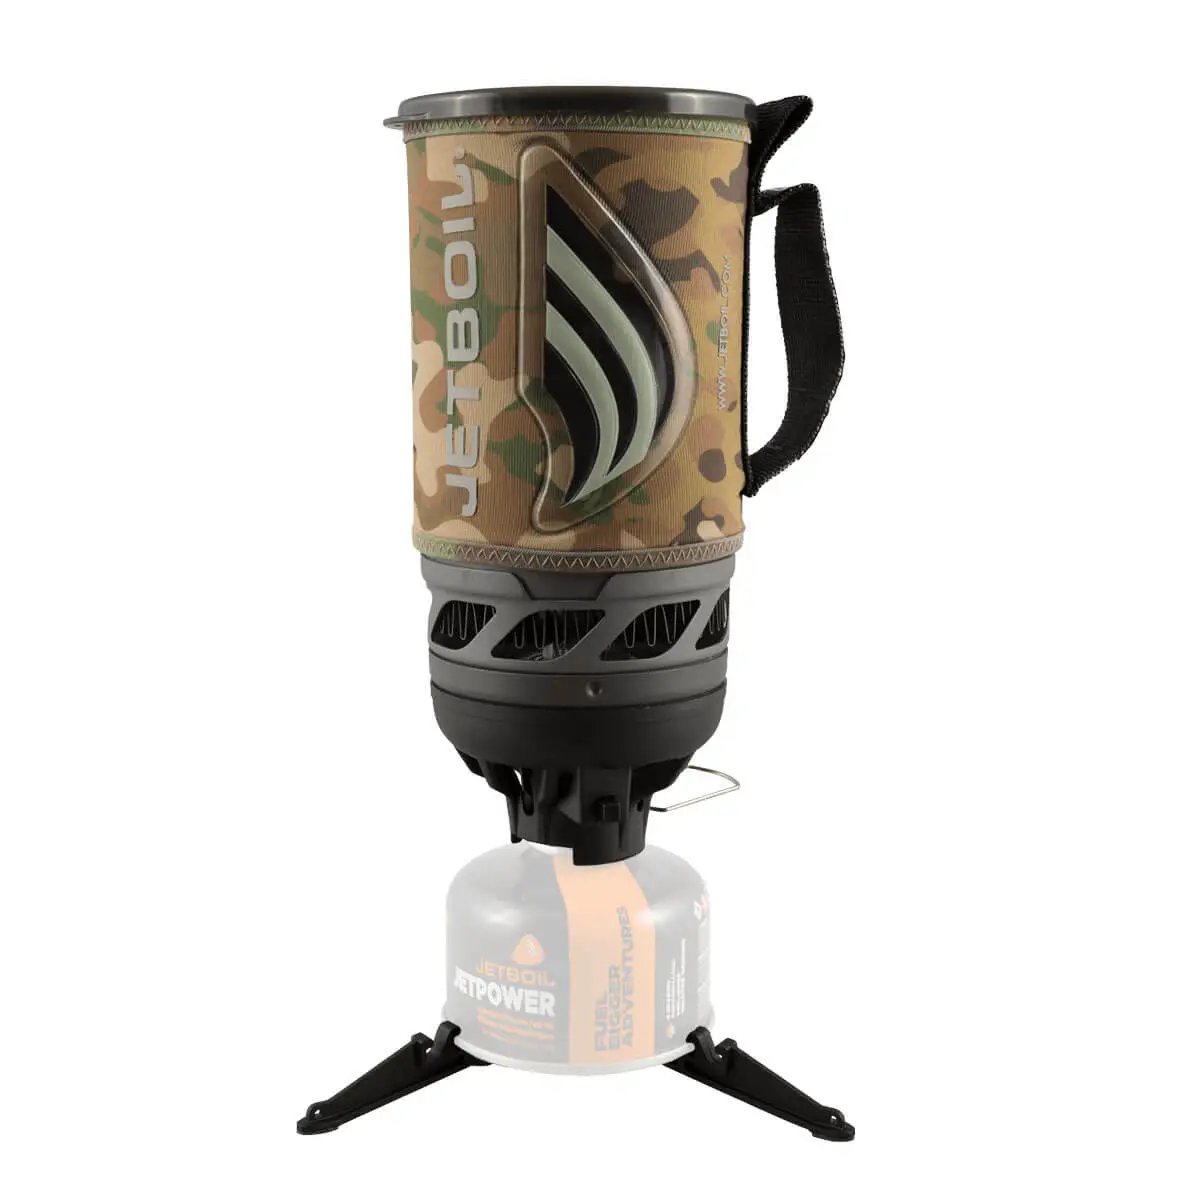 Jetboil Flash Camo 1L Personal Cooking Stove - John Bull Clothing